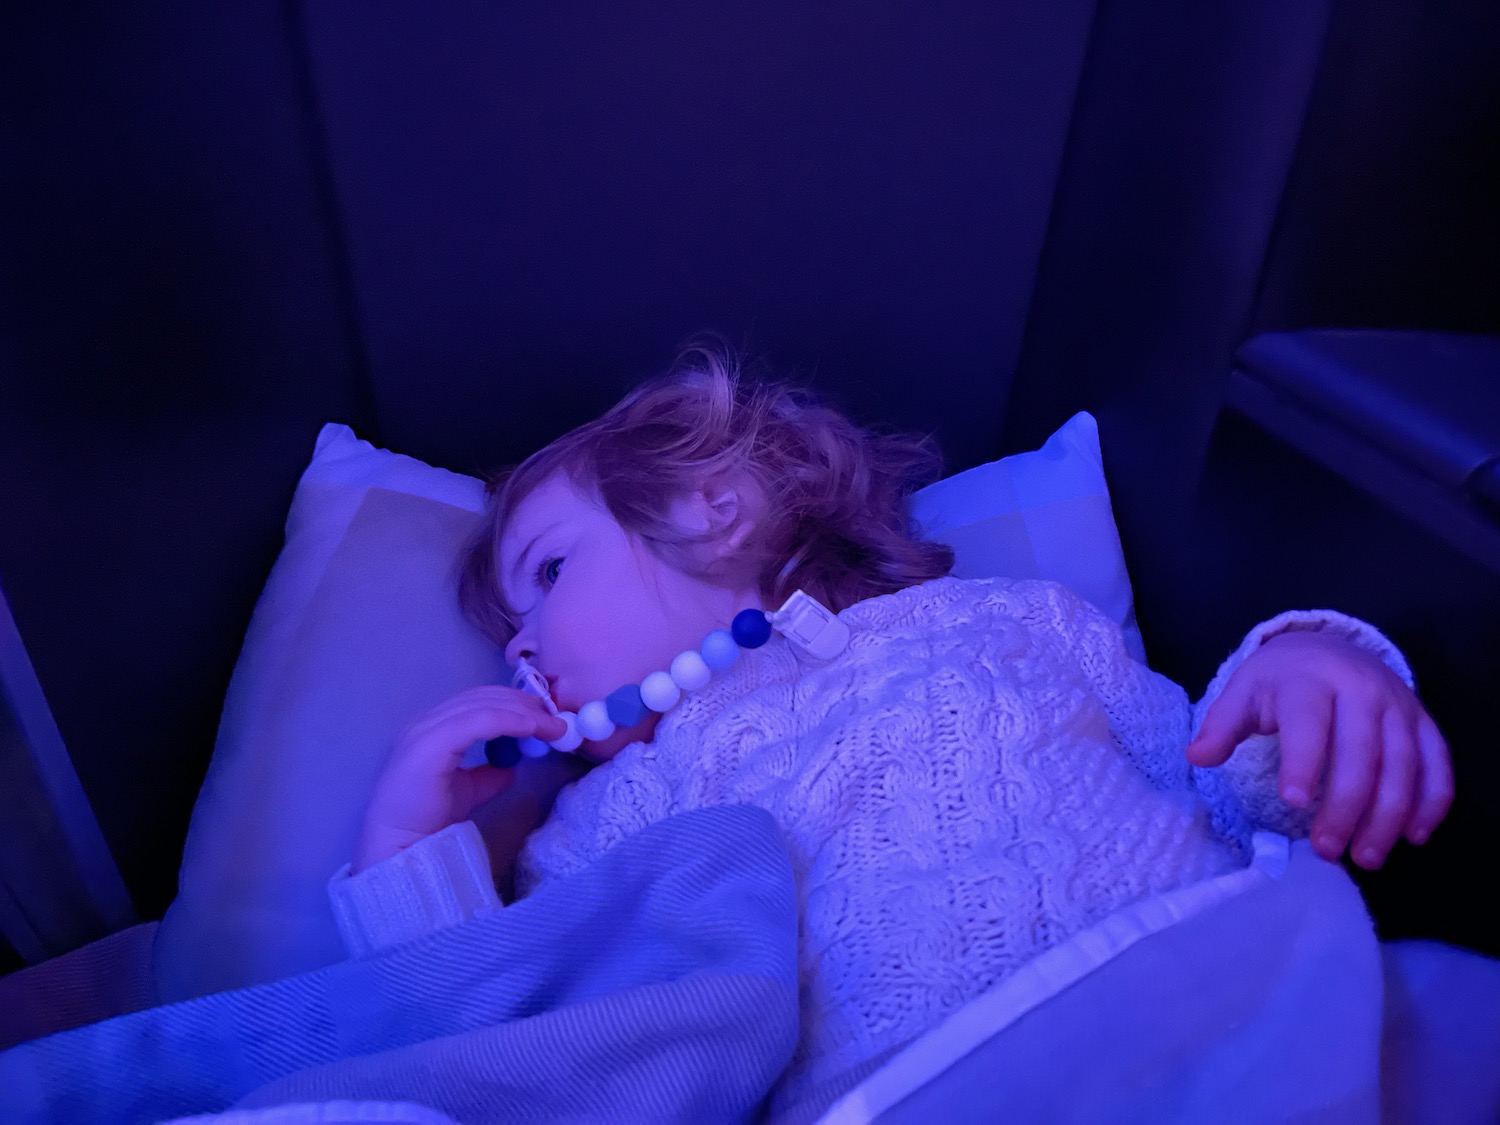 a child lying in a bed with a pacifier in her mouth